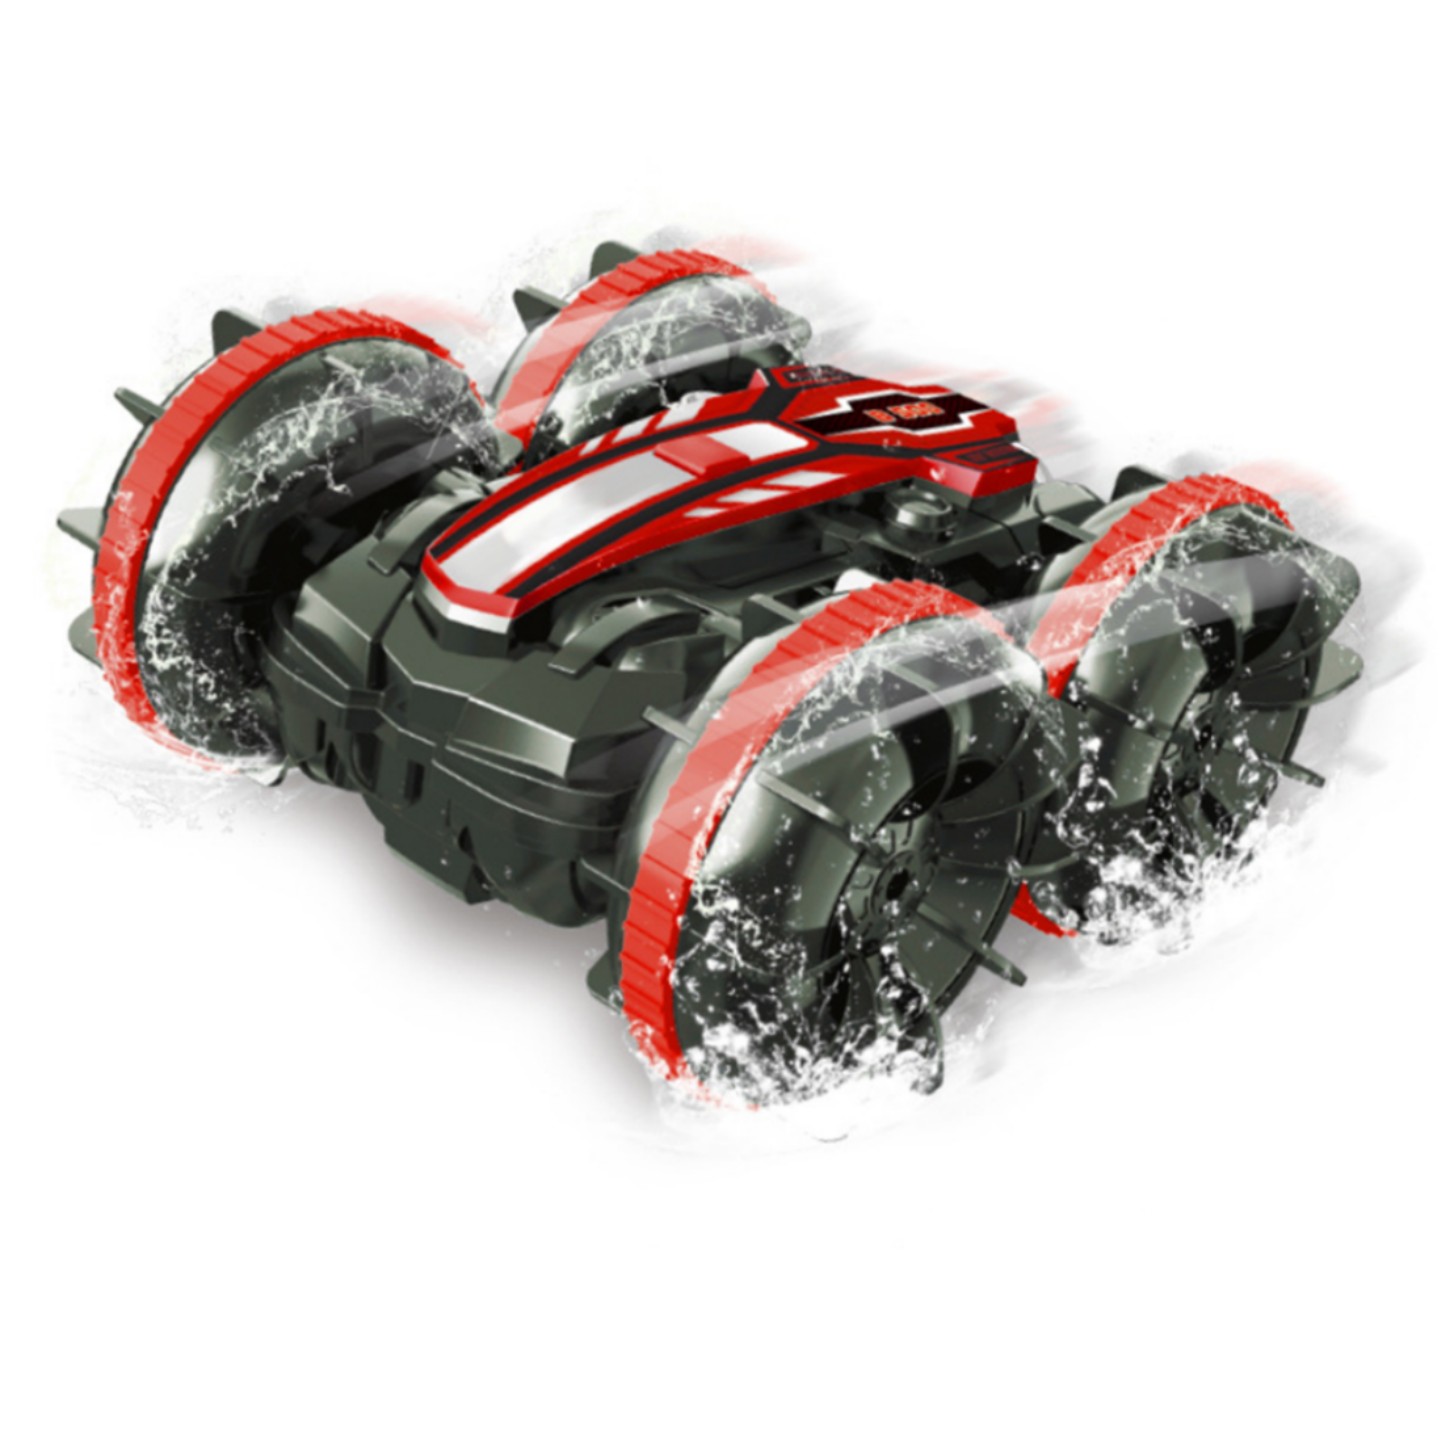 2.4ghz Amphibious Remote Control Car Wireless Electric Double-sided Stunt Off-road Vehicle Toys for Kids